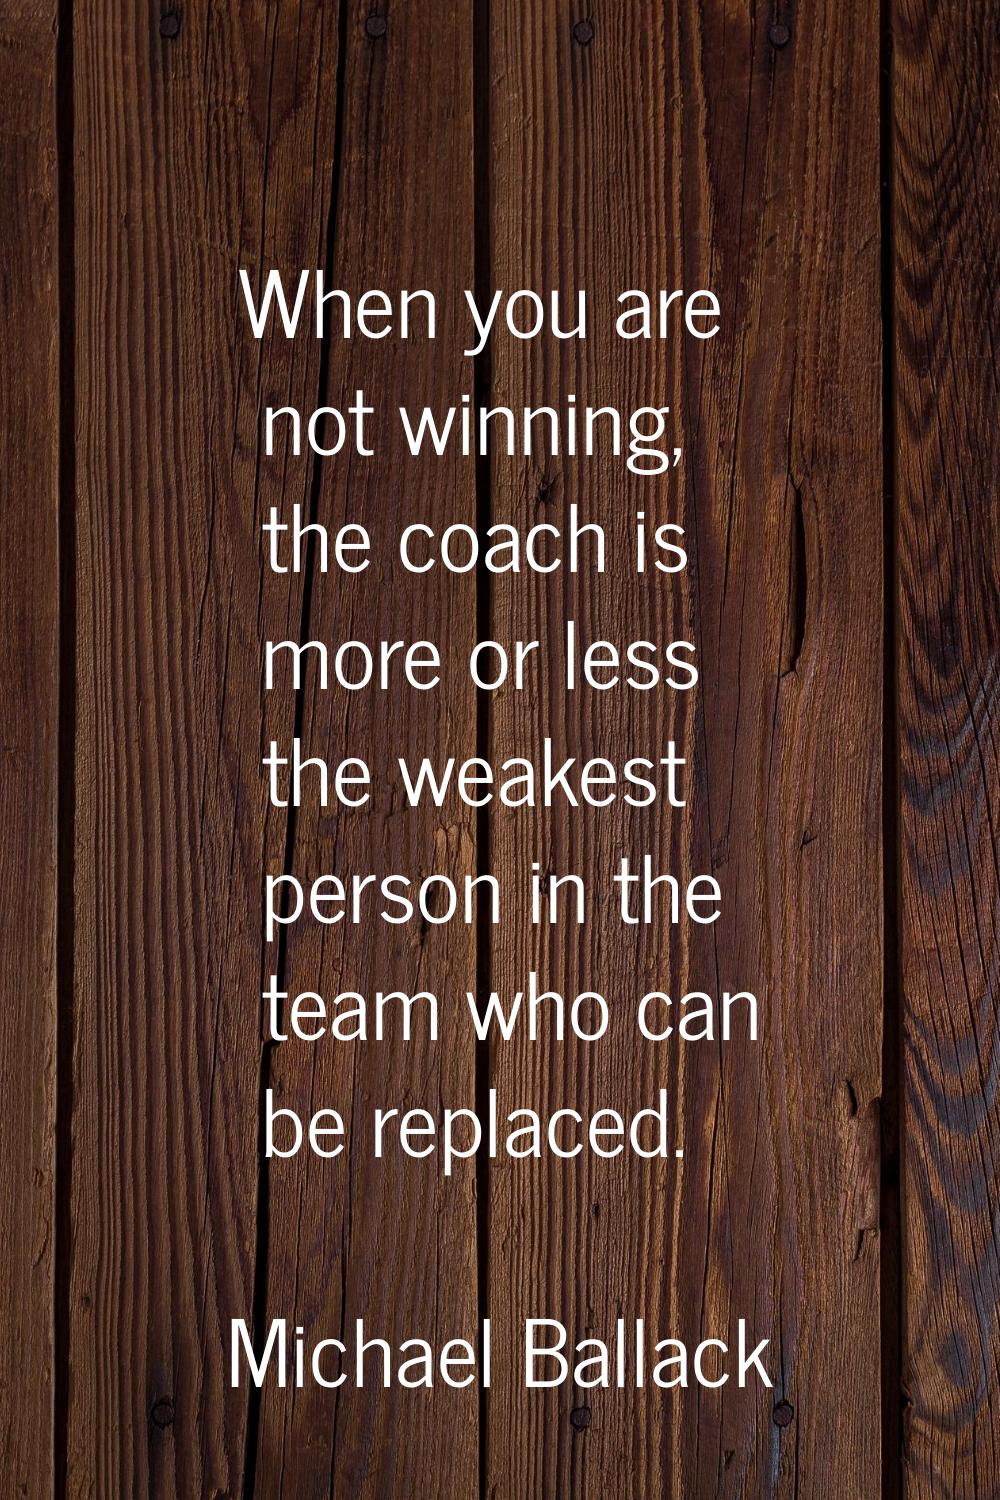 When you are not winning, the coach is more or less the weakest person in the team who can be repla